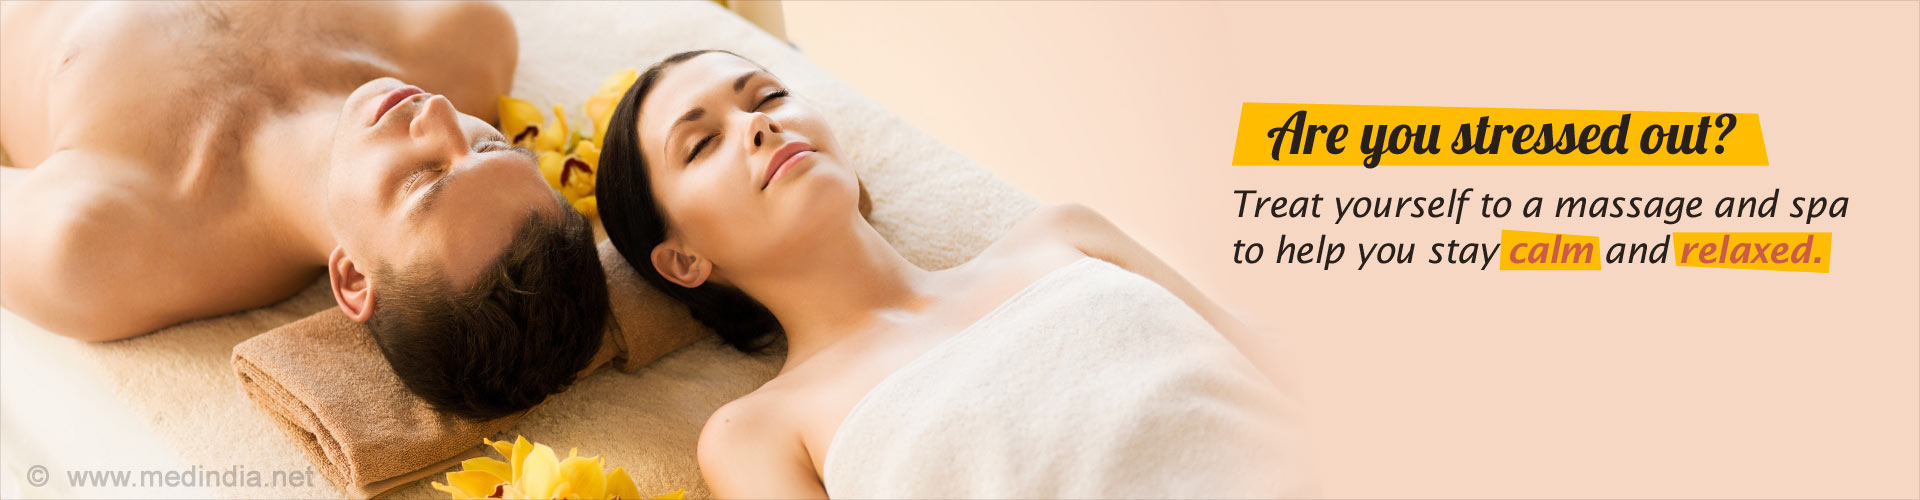 Are you stressed out? Treat yourself to a massage and spa to help you stay calm and relaxed.